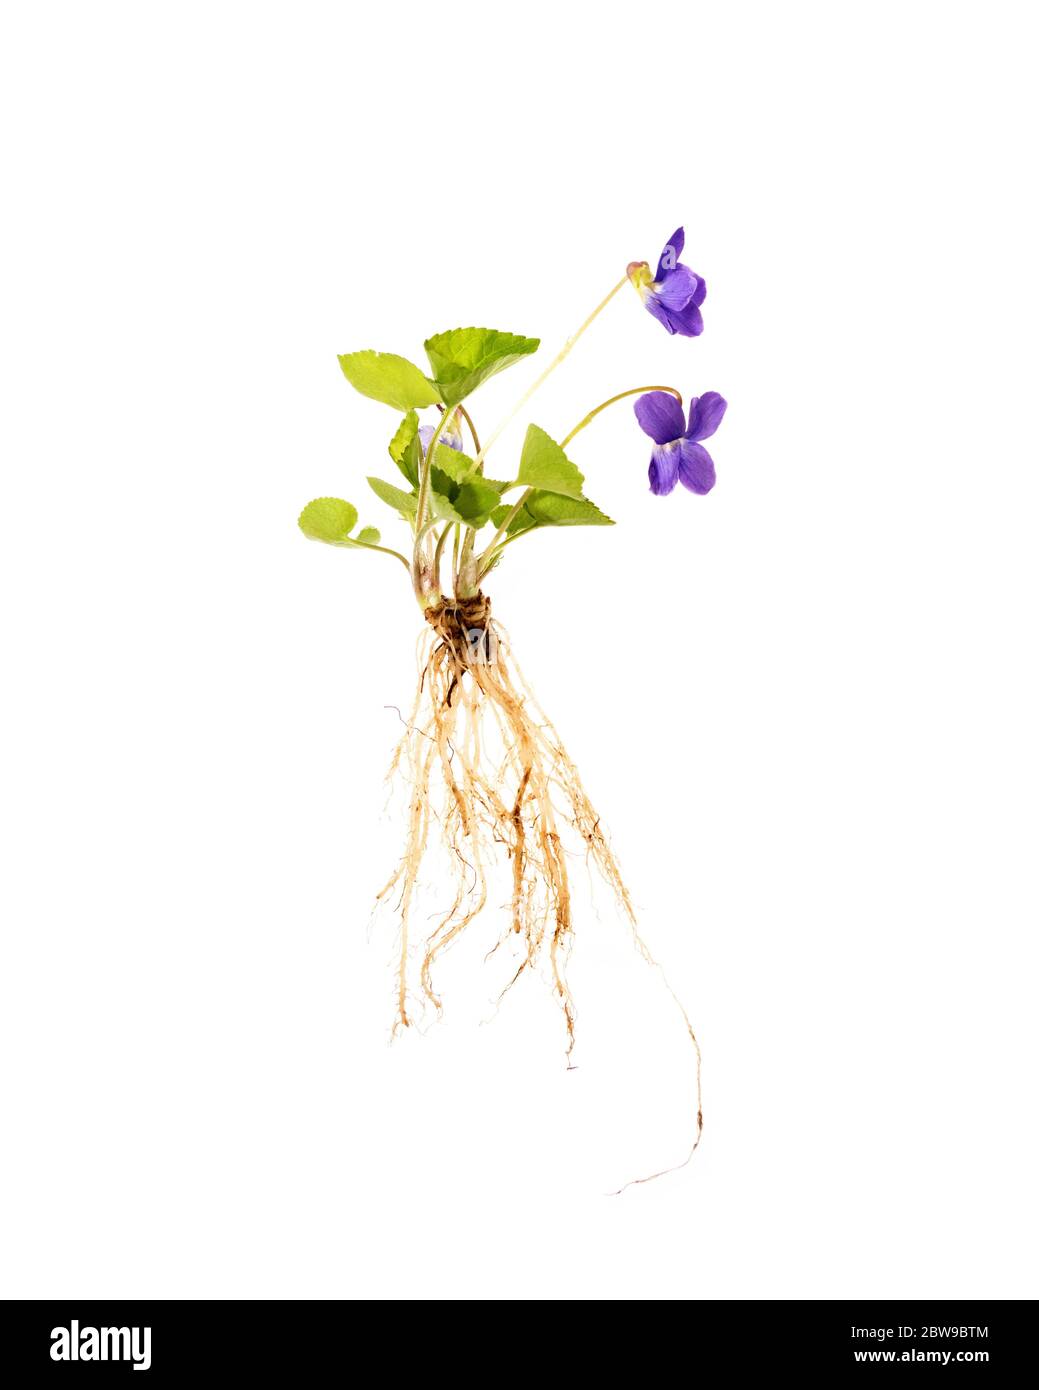 Wild violet (Viola sororia) on white background, showing entire plant (roots, stems, leaves, flowers) Stock Photo